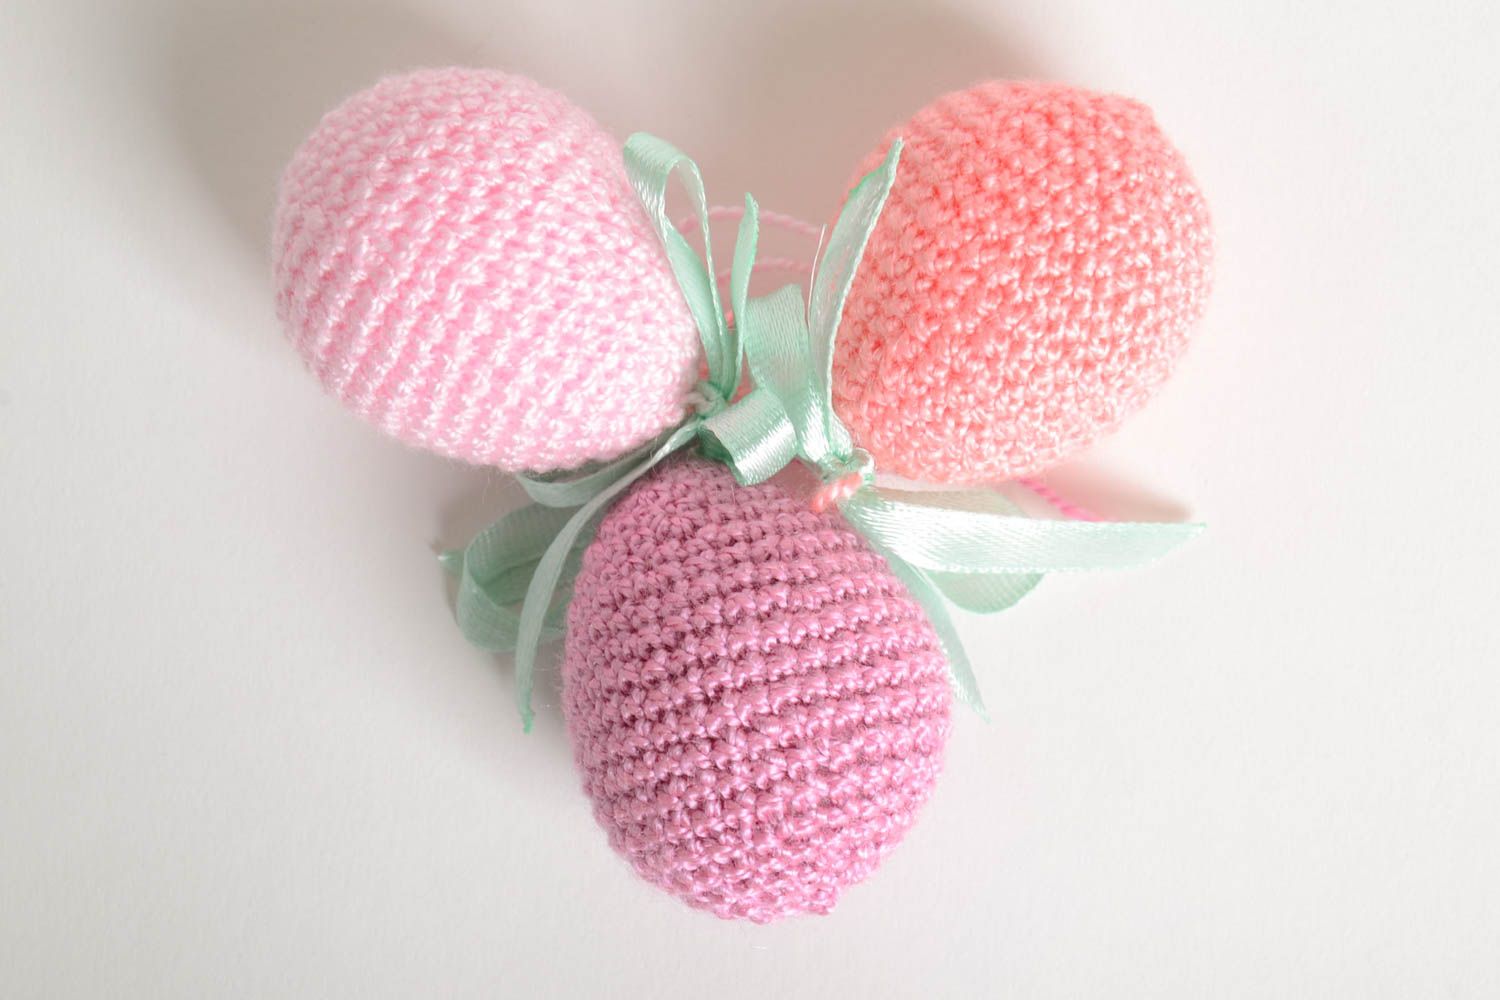 Beautiful handmade crochet Easter egg Easter decoration 3 pieces gift ideas photo 4